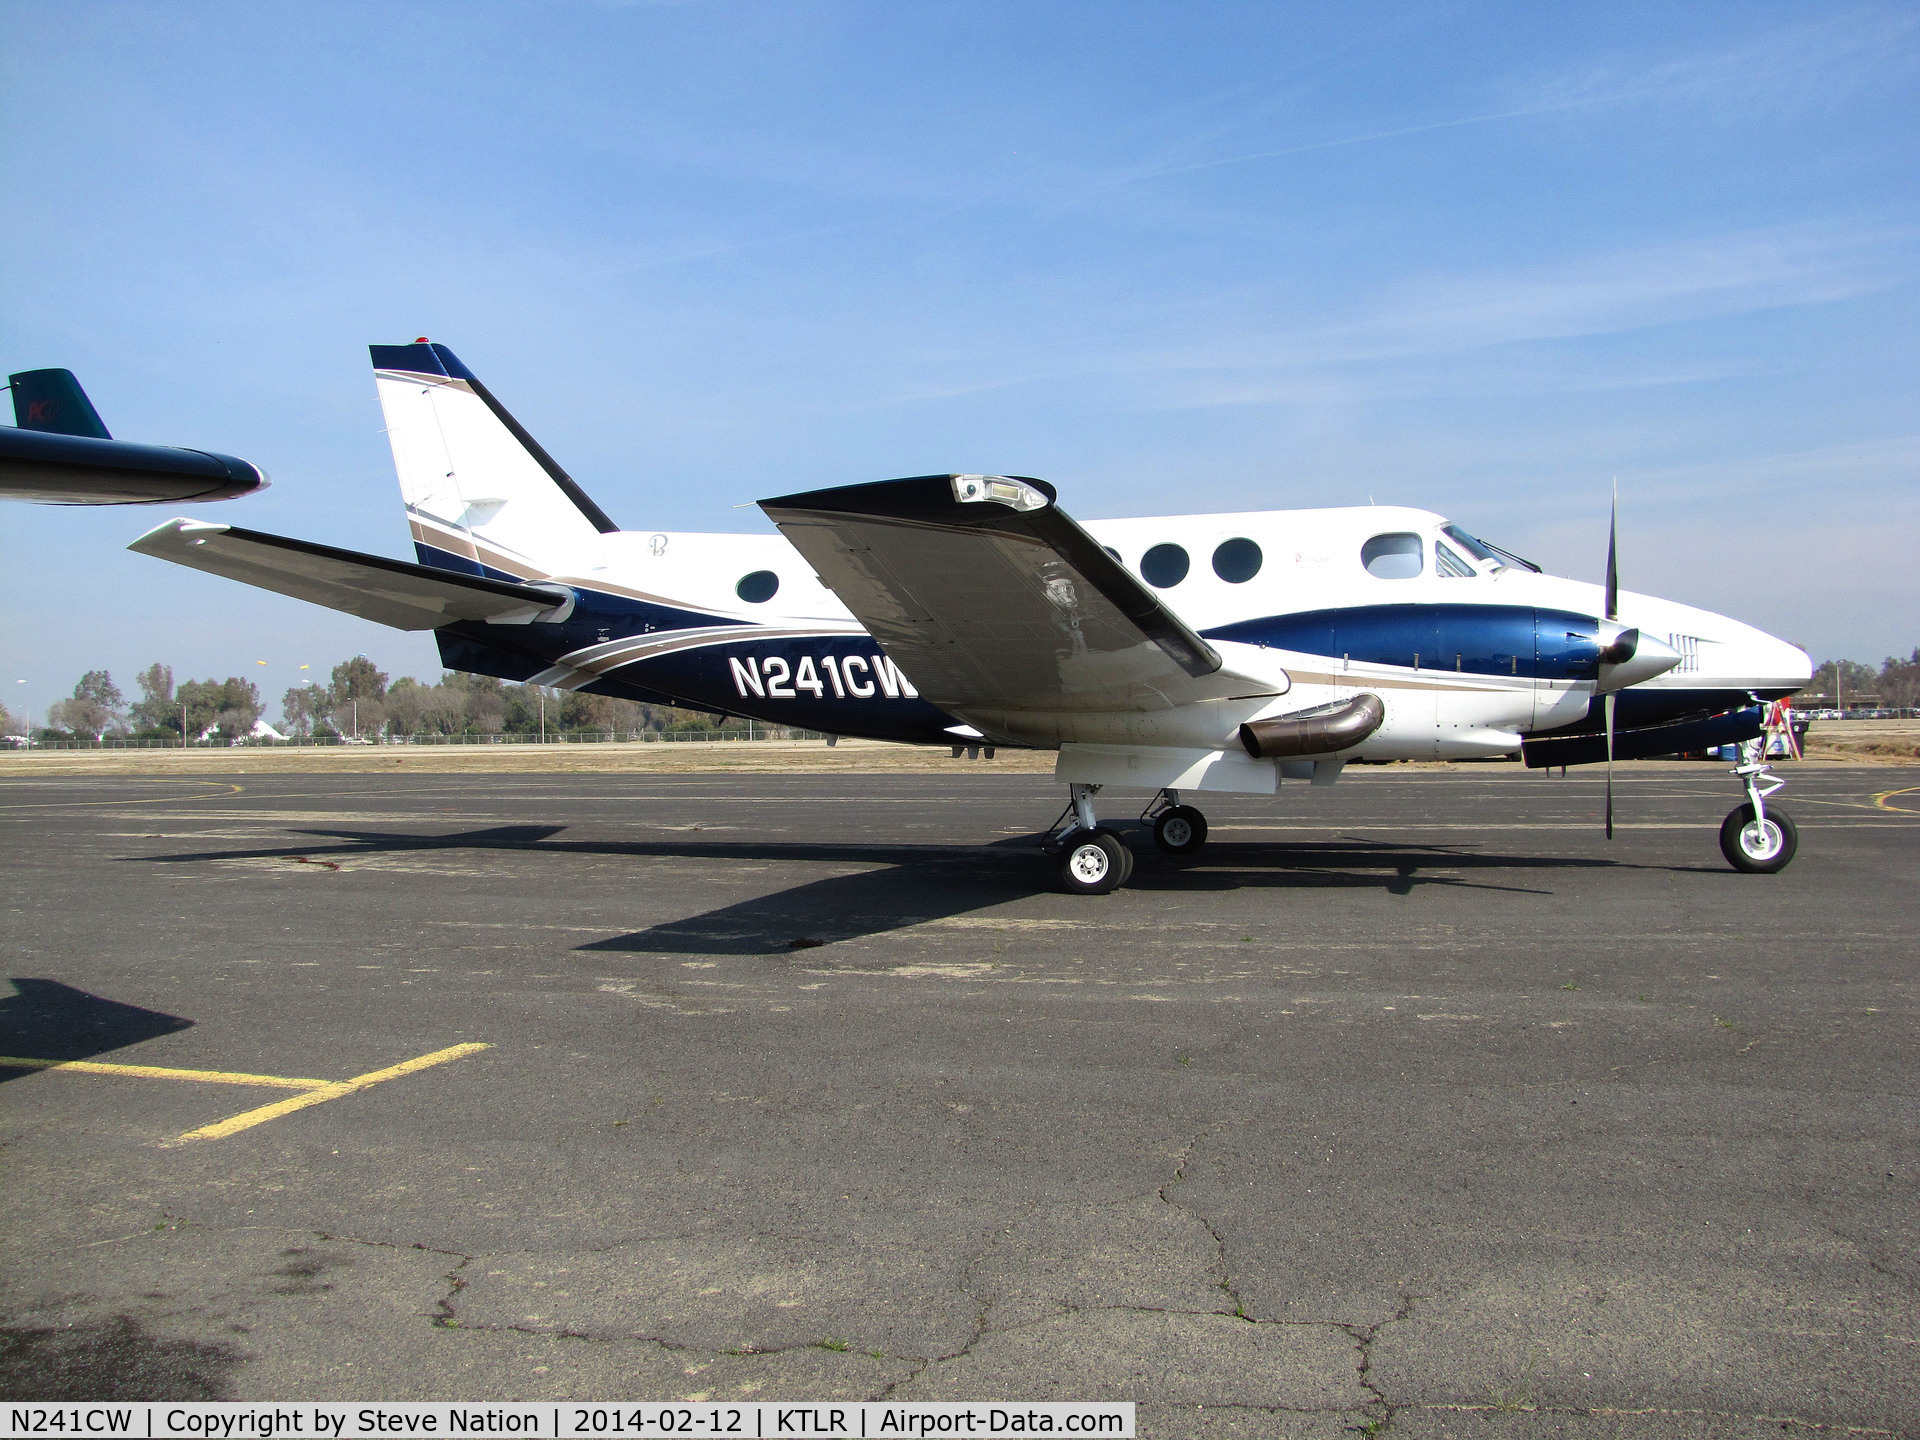 N241CW, 1978 Beech B100 King Air C/N BE-54, Beech B100 King Air @ Mefford Field (Tulare, CA) for 2014 International Ag Expo